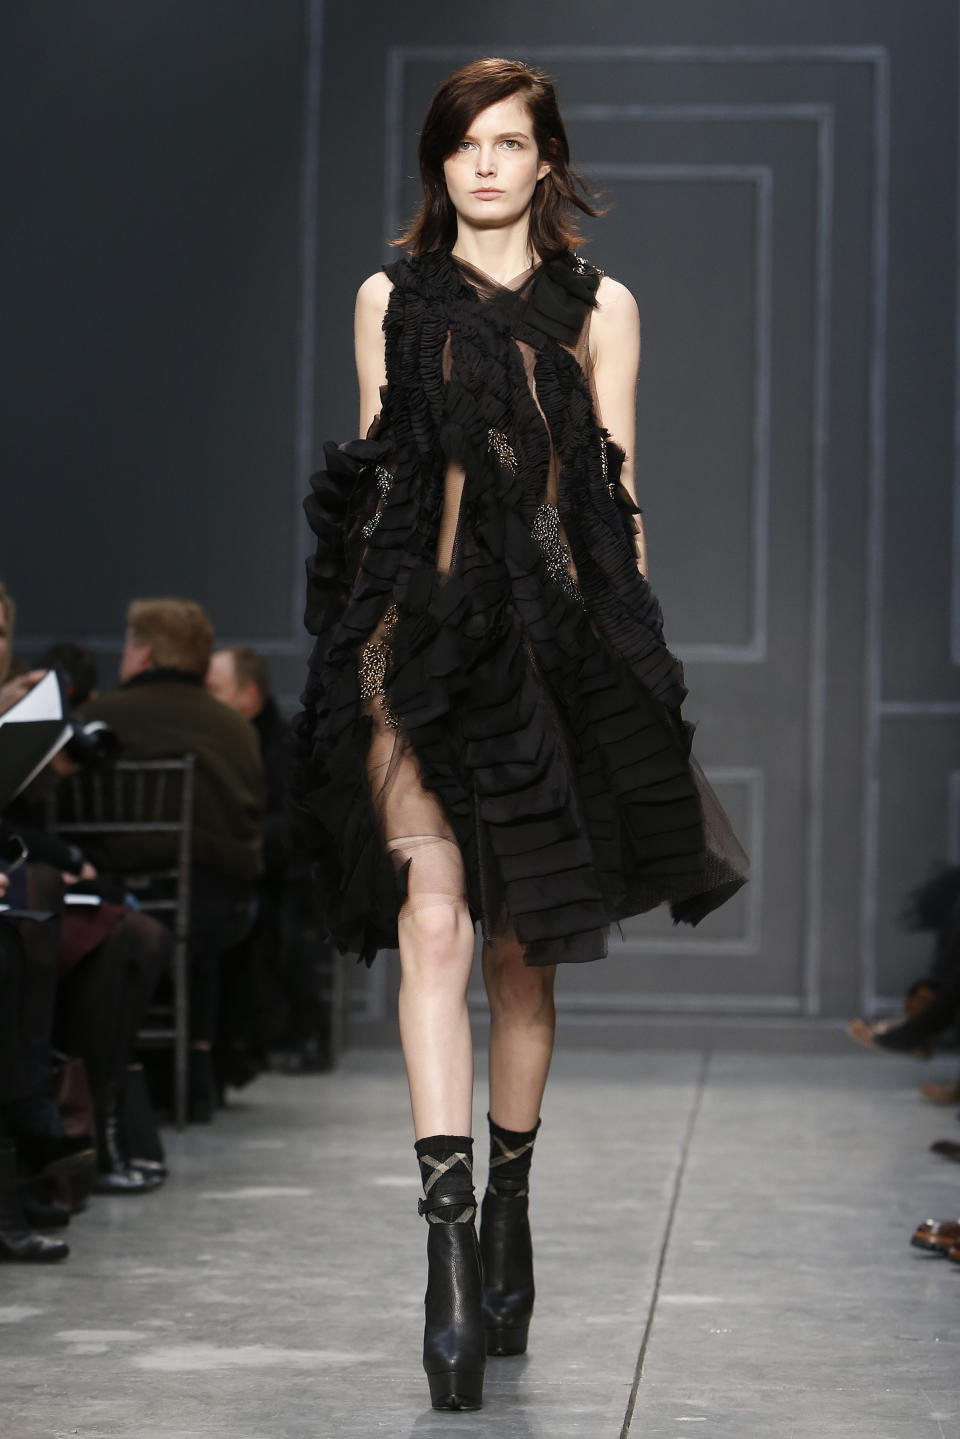 The Vera Wang Fall 2014 collection is modeled during Fashion Week in New York, Tuesday, Feb. 11, 2014. (AP Photo/Jason DeCrow)